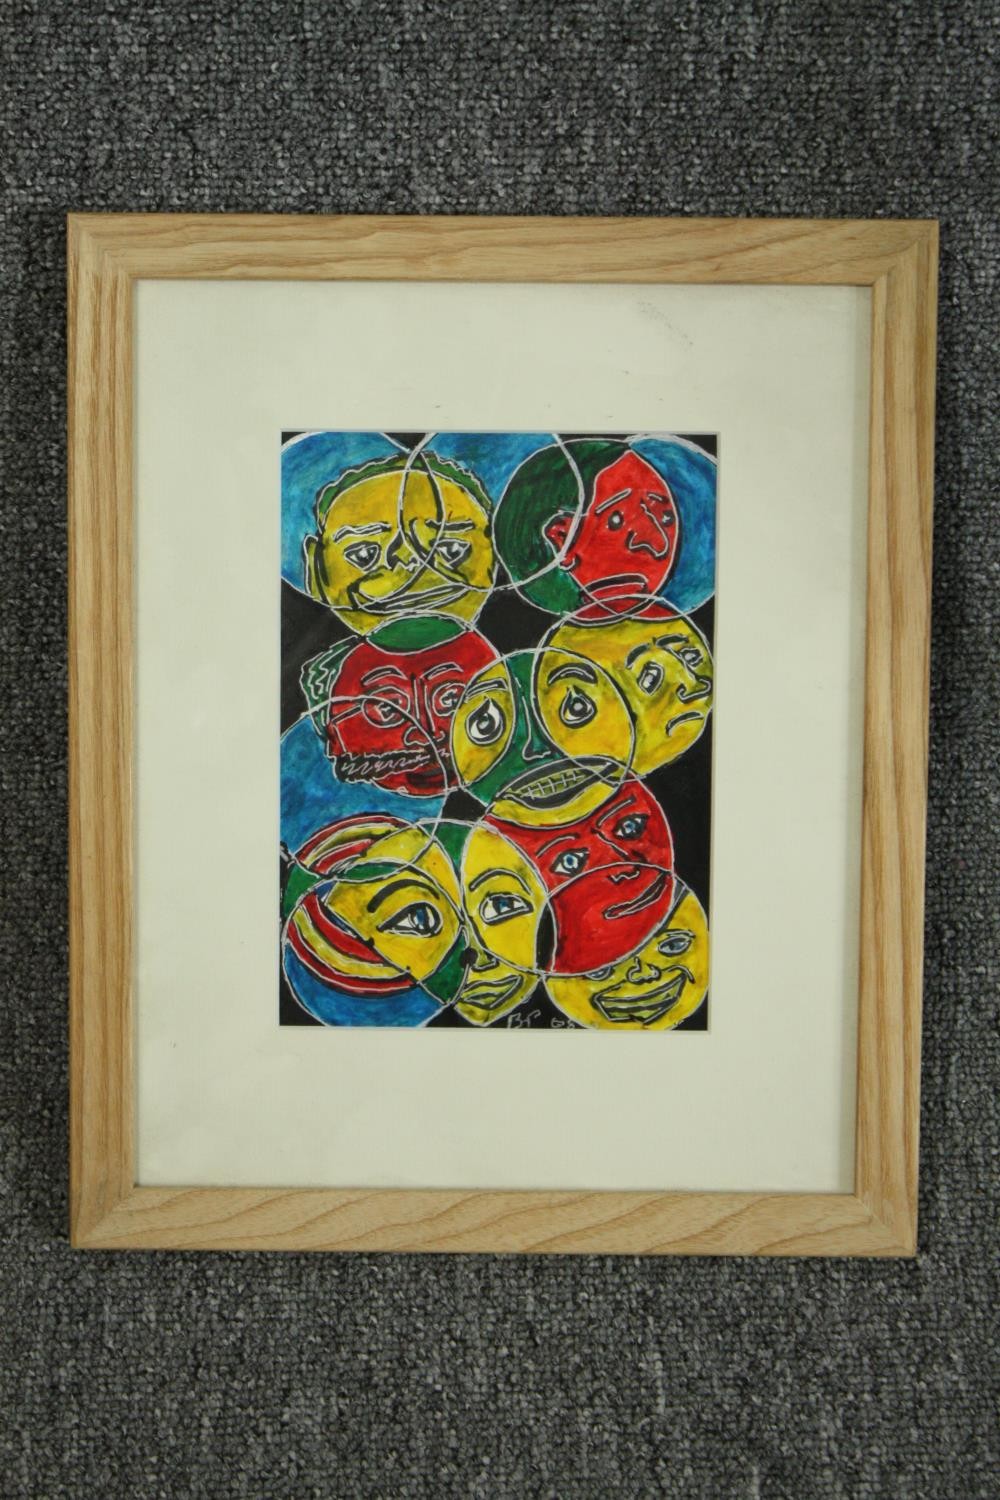 Watercolour. A collection of faces. Signed with initials by 'Bruce Purchase' and dated 2008. - Image 2 of 4